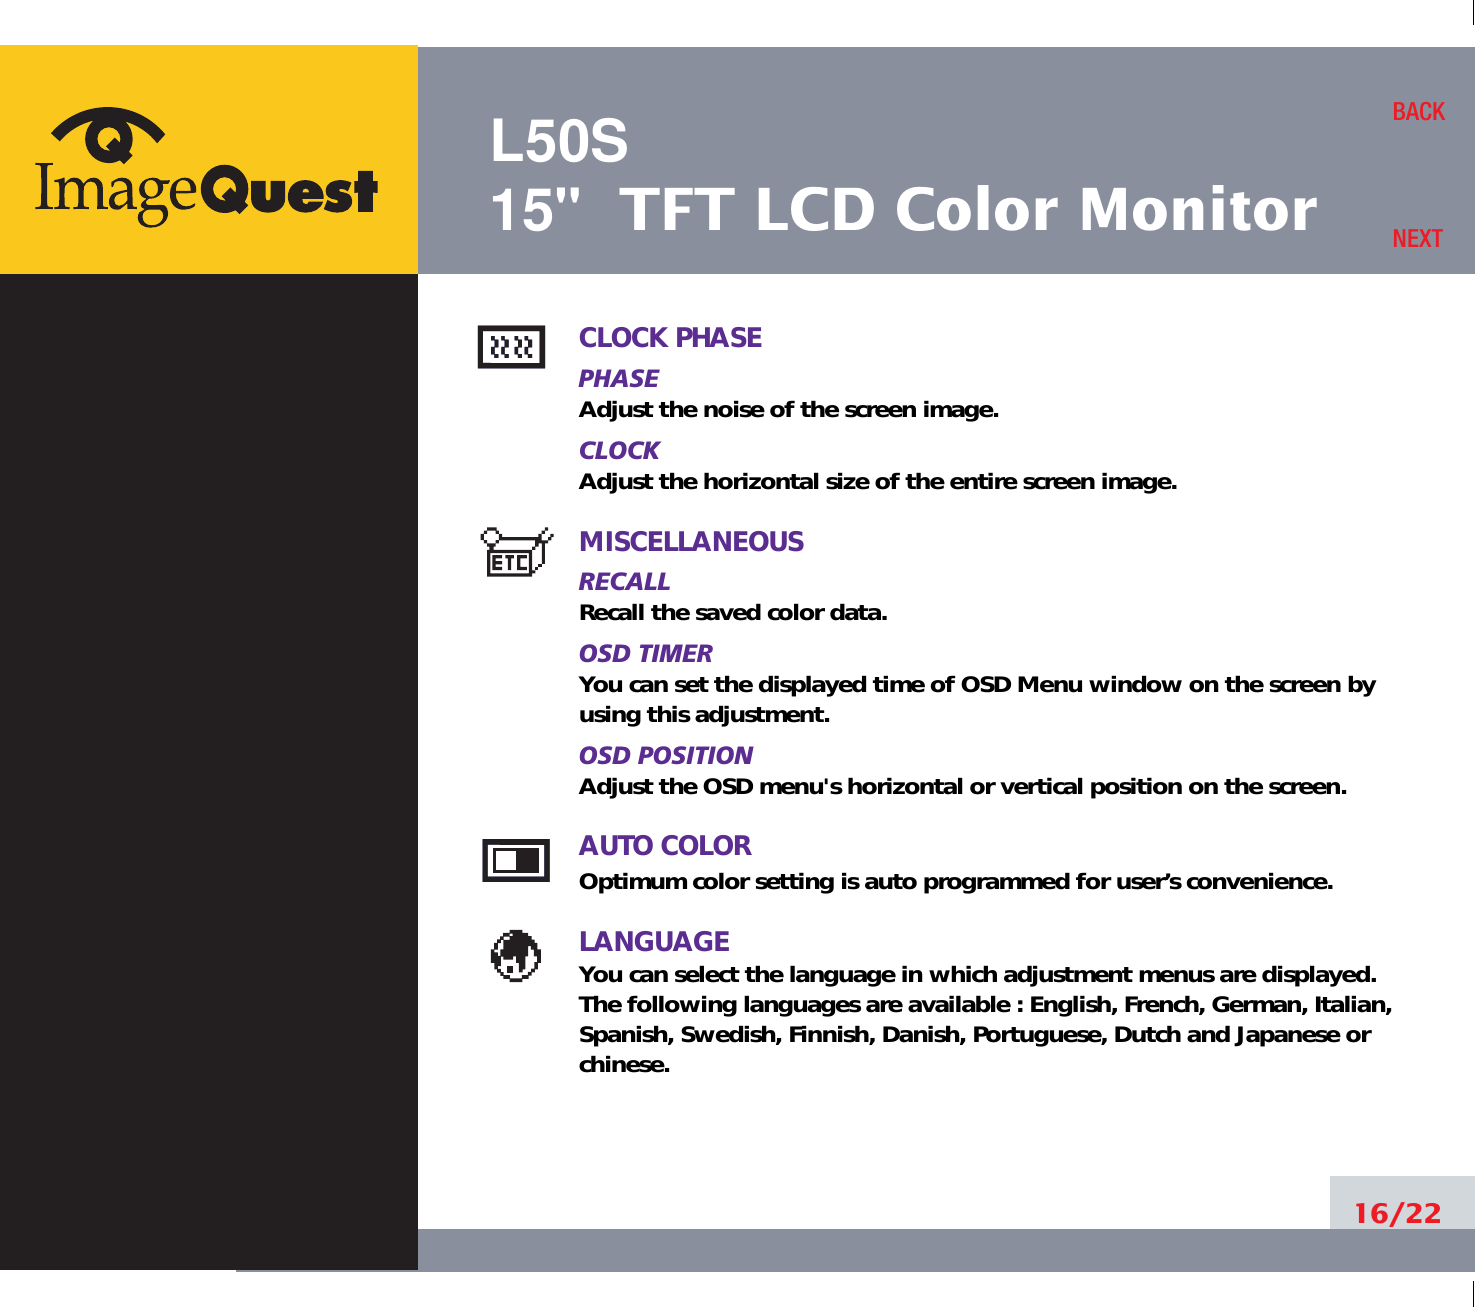 L50S15&quot; TFT LCD Color Monitor16/22BACKNEXTCLOCK PHASEPHASEAdjust the noise of the screen image.CLOCKAdjust the horizontal size of the entire screen image.MISCELLANEOUSRECALL Recall the saved color data.OSD TIMERYou can set the displayed time of OSD Menu window on the screen byusing this adjustment.OSD POSITIONAdjust the OSD menu&apos;s horizontal or vertical position on the screen.AUTO COLOROptimum color setting is auto programmed for user’s convenience.LANGUAGEYou can select the language in which adjustment menus are displayed. The following languages are available : English, French, German, Italian,Spanish, Swedish, Finnish, Danish, Portuguese, Dutch and Japanese orchinese.